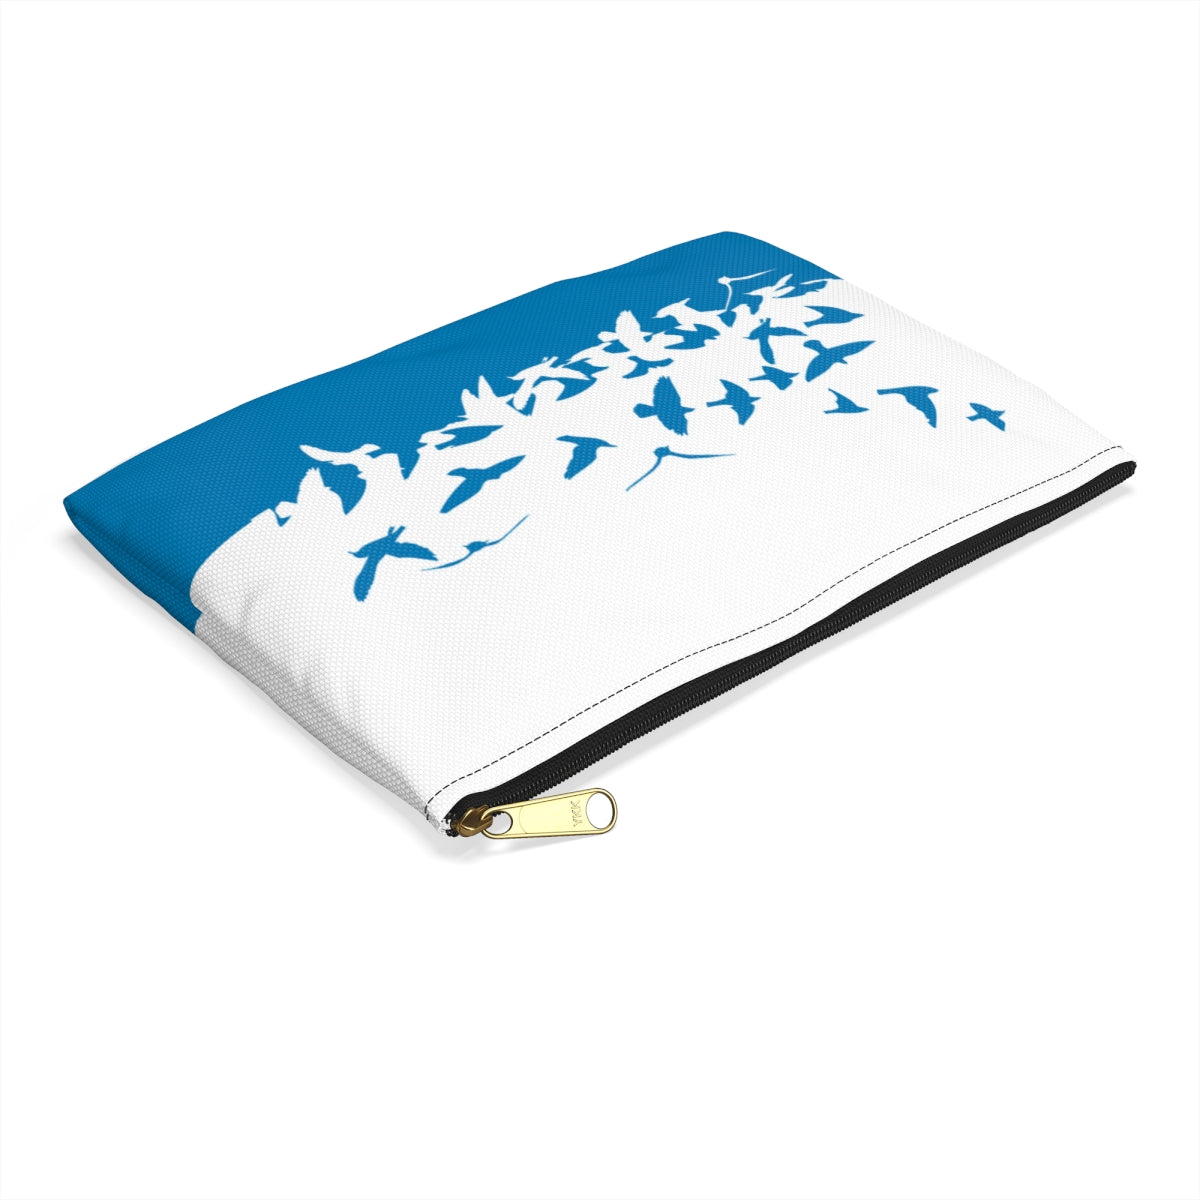 Flying Seabirds Accessories Pouch